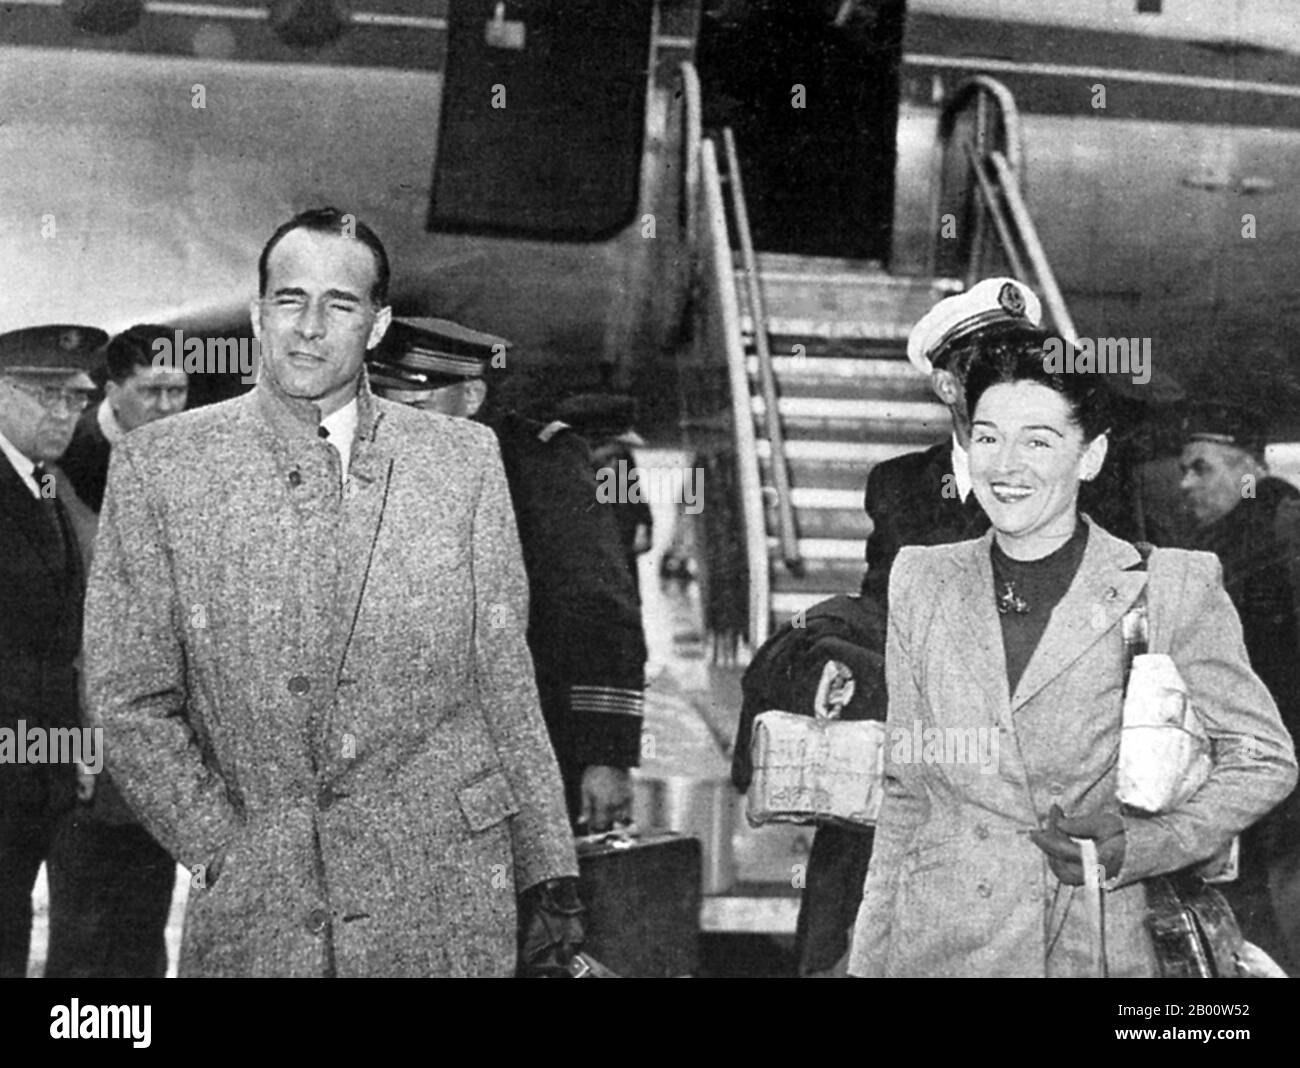 Vietnam: Major Jean Sainteny and his wife arrive at Orly Airport, Paris, shortly after brokering a pact with Ho Chi Minh which subsequently fell through.  Jean Sainteny or Jean Roger (May 29, 1907 in Vésinet - February 25, 1978) was a French politician who was sent to Vietnam after the end of the Second World War in order to accept the surrender of the Japanese forces and to attempt to reincorporate Vietnam into French Indochina. He reached an agreement with Ho which would have kept Vietnam in the Union francaise. The agreement became ineffective after the French bombing of Haiphong. Stock Photo